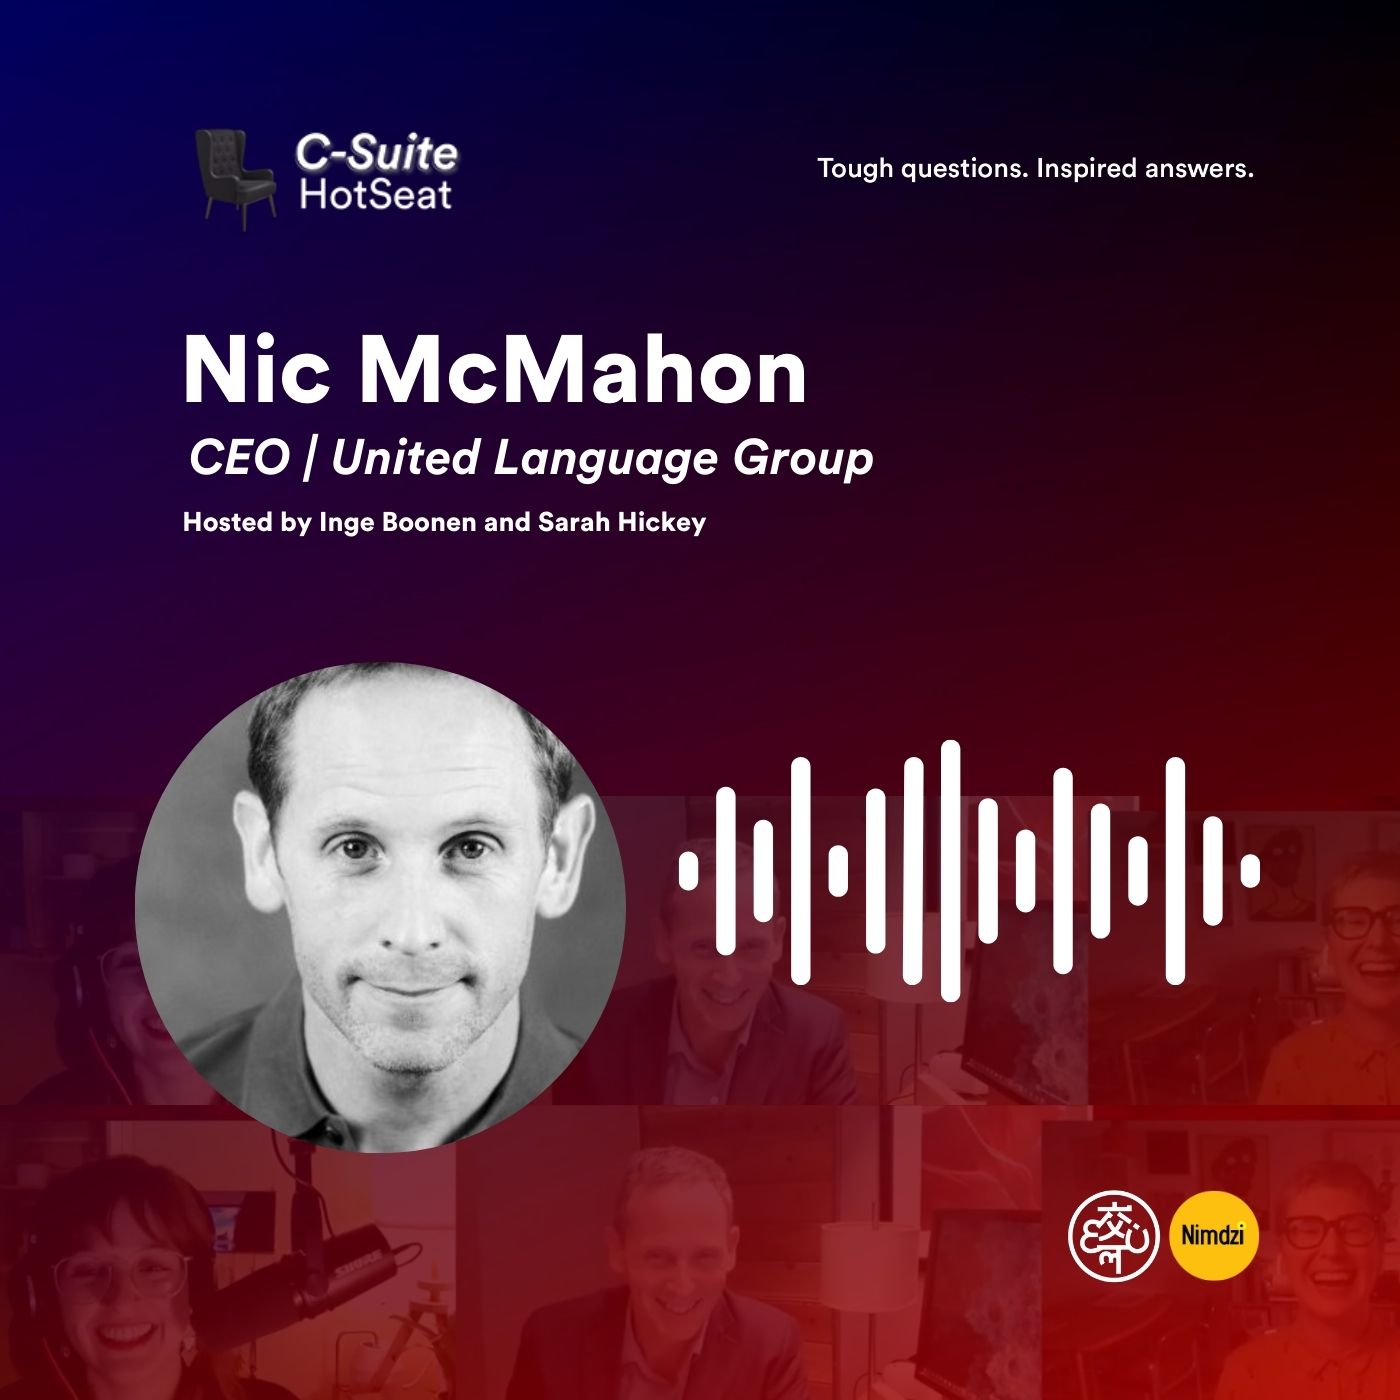 The Human Experience in Business with CEO Nic McMahon | C-Suite HotSeat E16